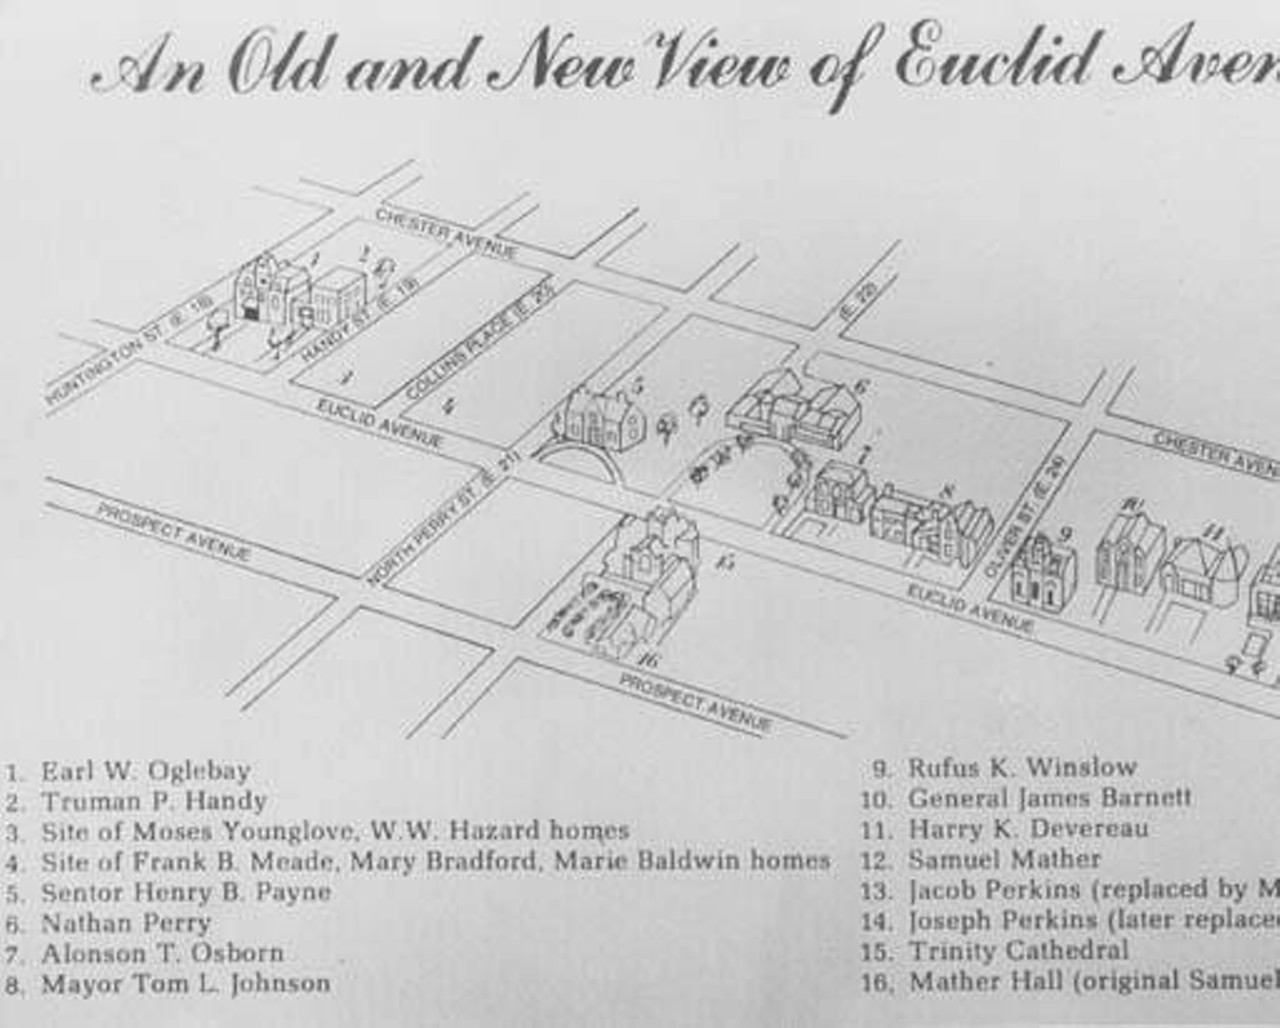 Drawing of Euclid Avenue map with Millionaires' Row landmarks, 1978